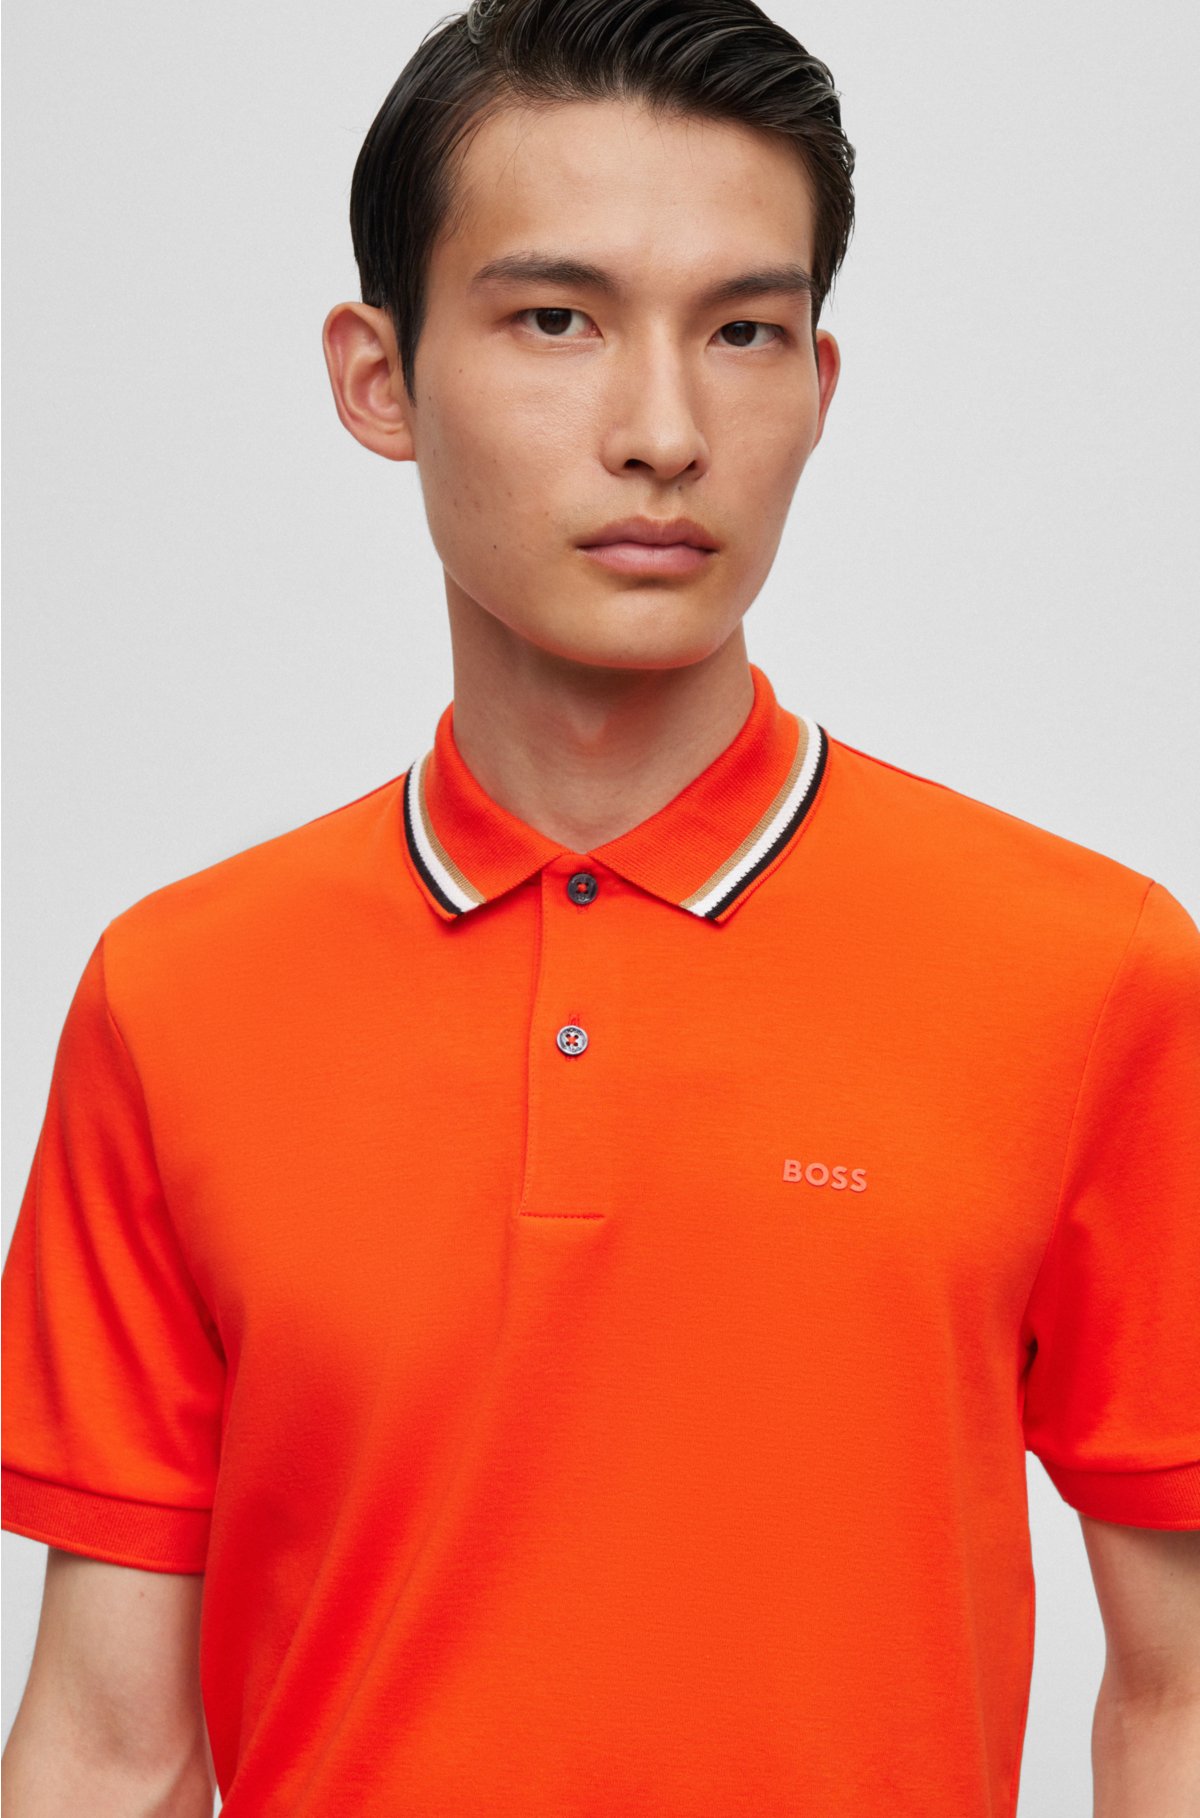 striped with - Slim-fit cotton collar polo BOSS shirt in